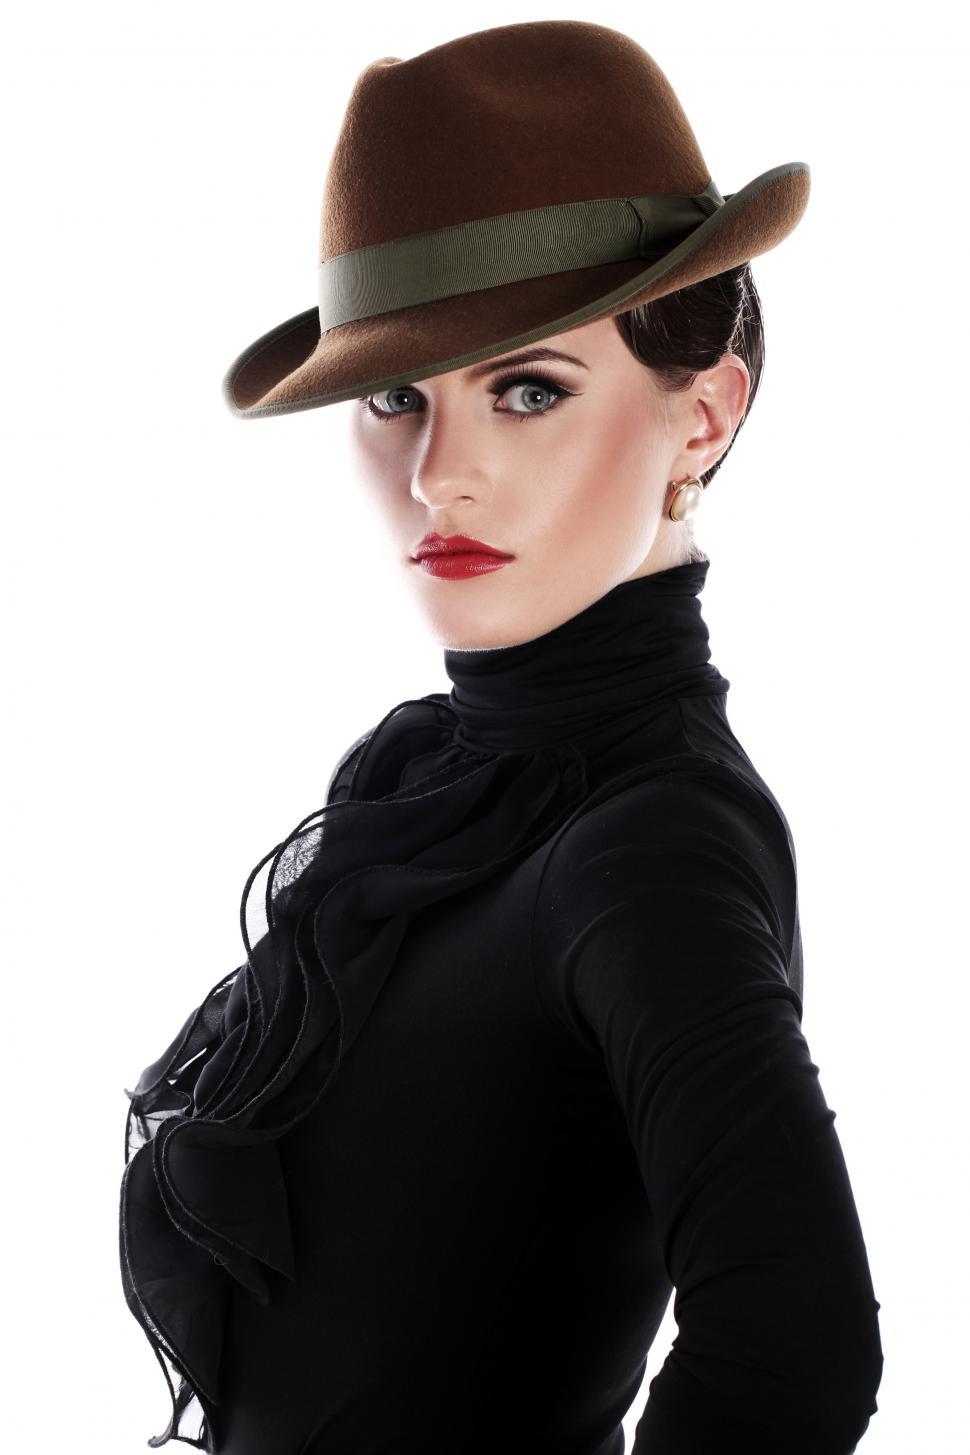 Free Image of Striking young woman in hat 